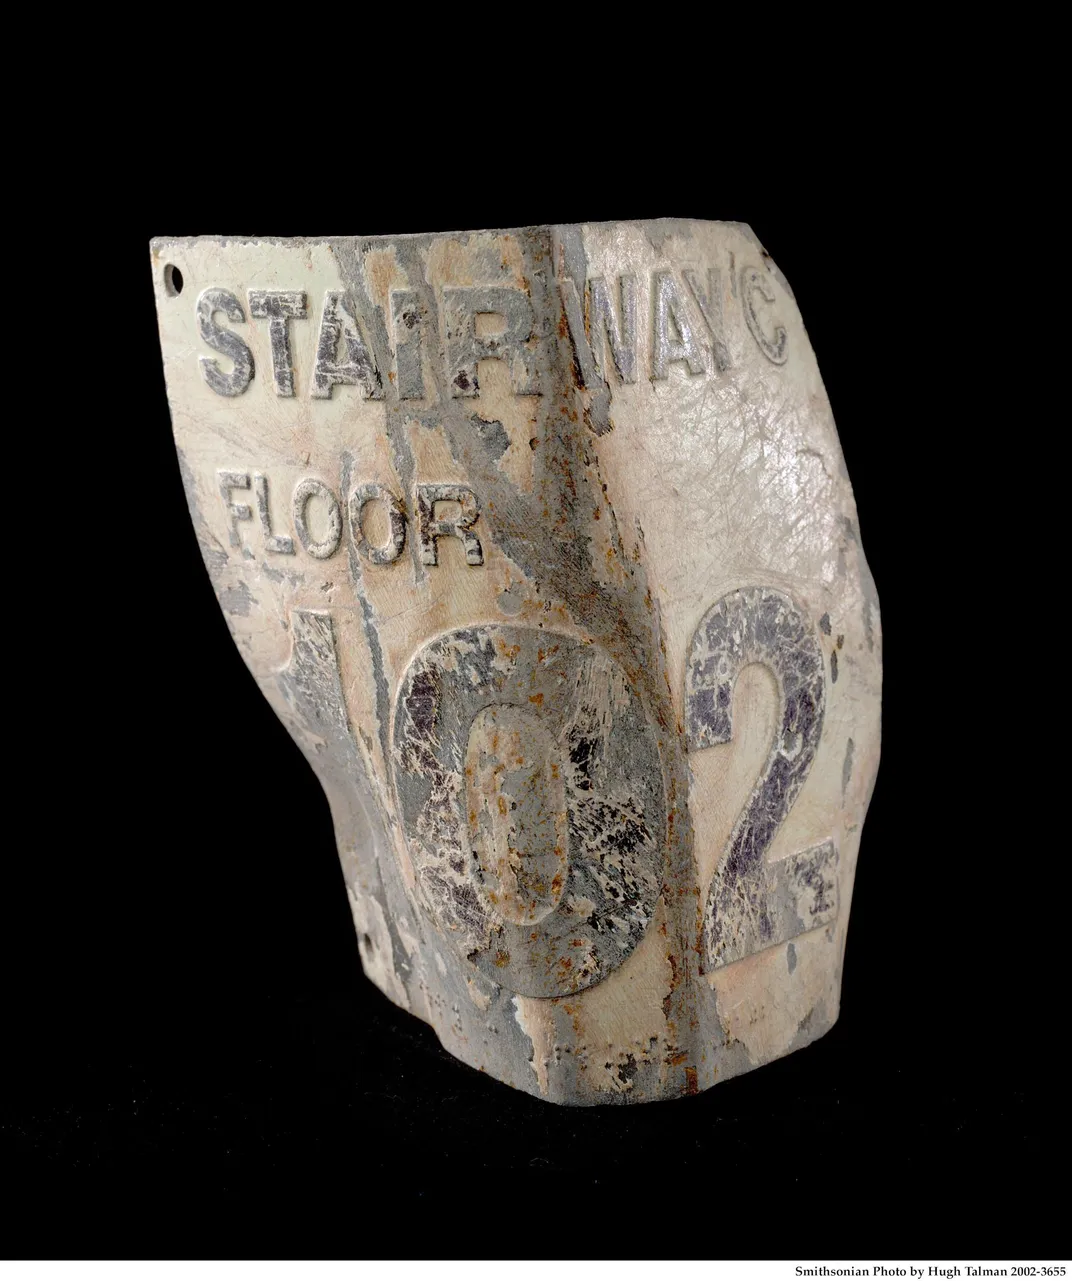 This damaged floor marker, labeled “Stairwell C, Floor 102,” was recovered from the debris of the World Trade Center.